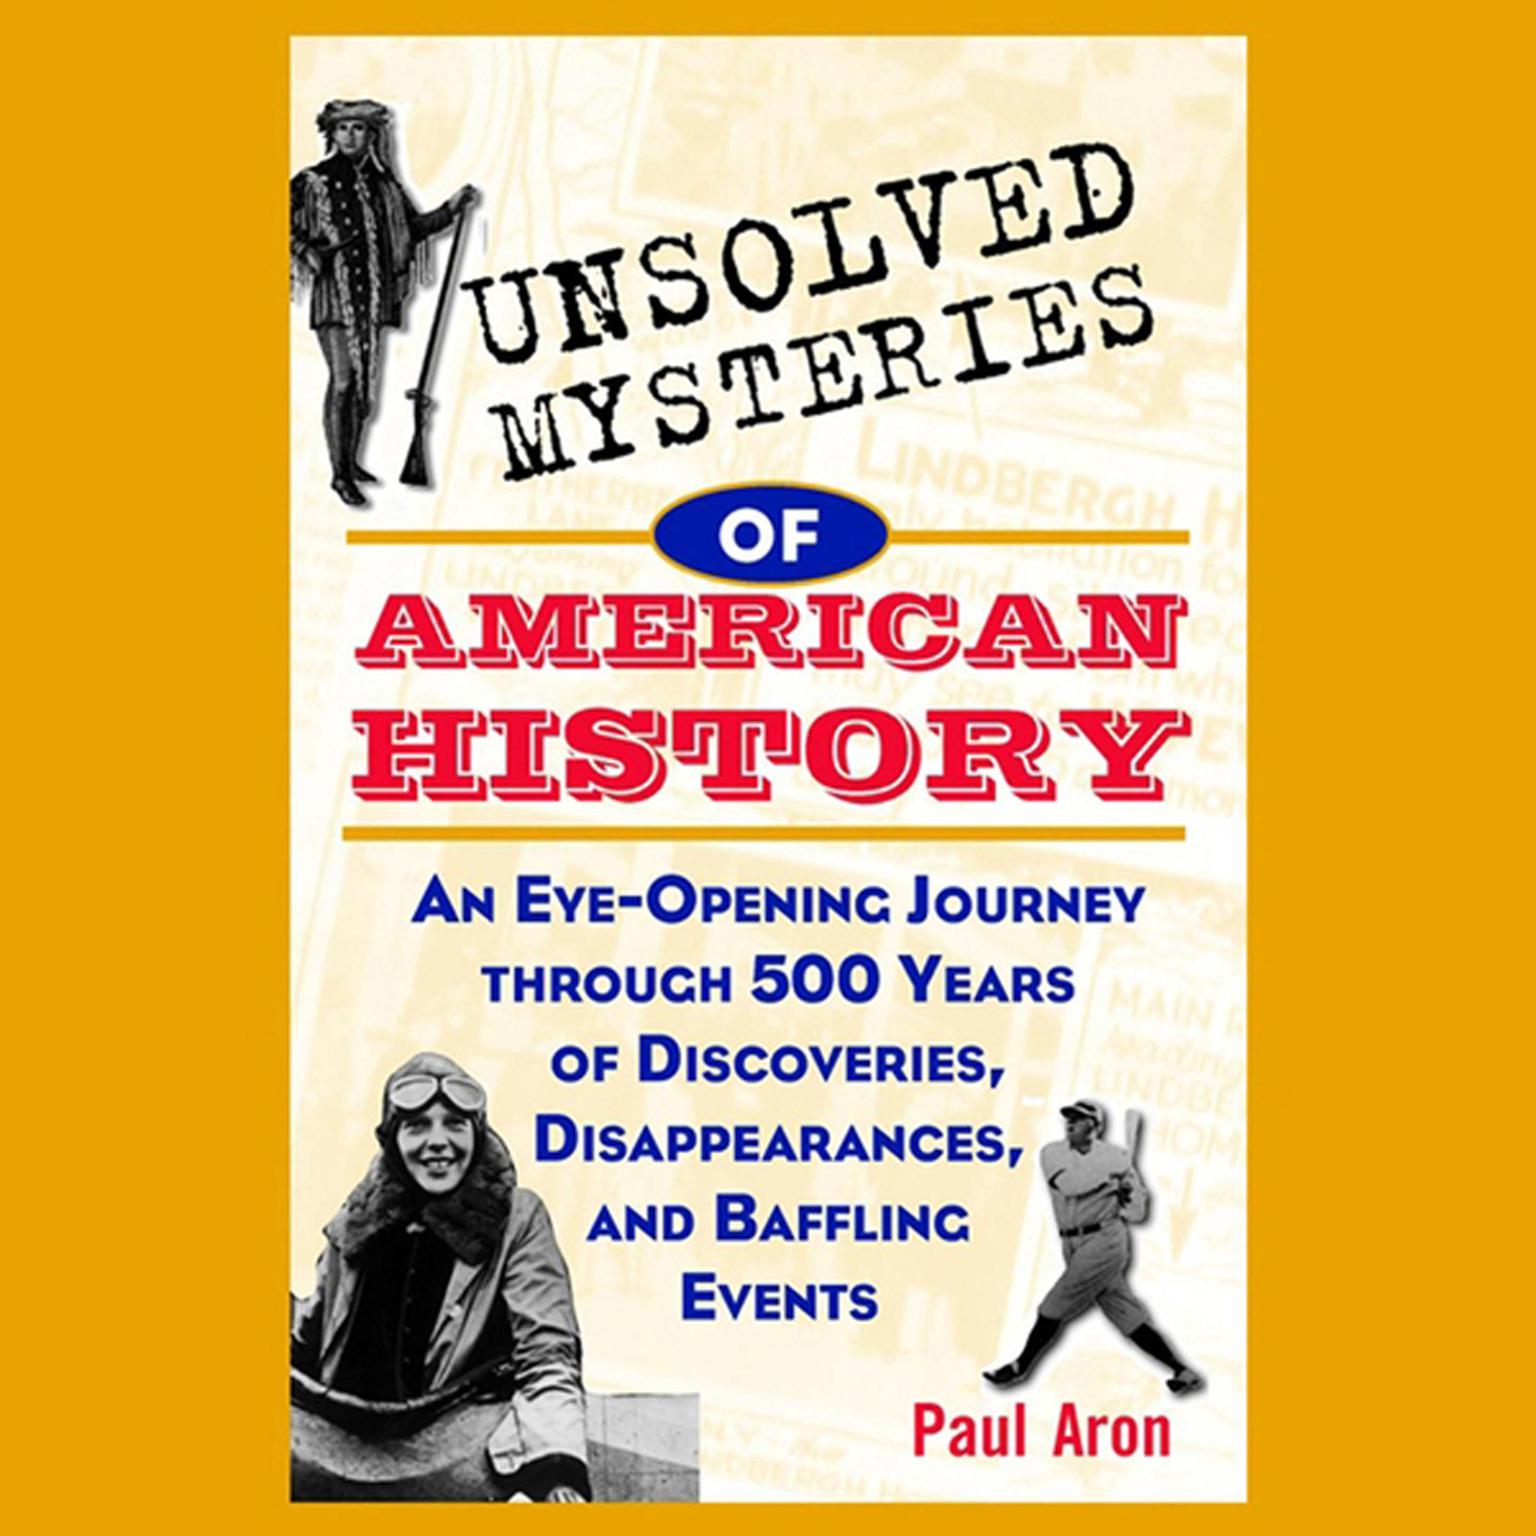 Unsolved Mysteries of American History: An Eye-Opening Journey through 500 Years of Discoveries, Disappearances, and Baffling Events Audiobook, by Paul Aron